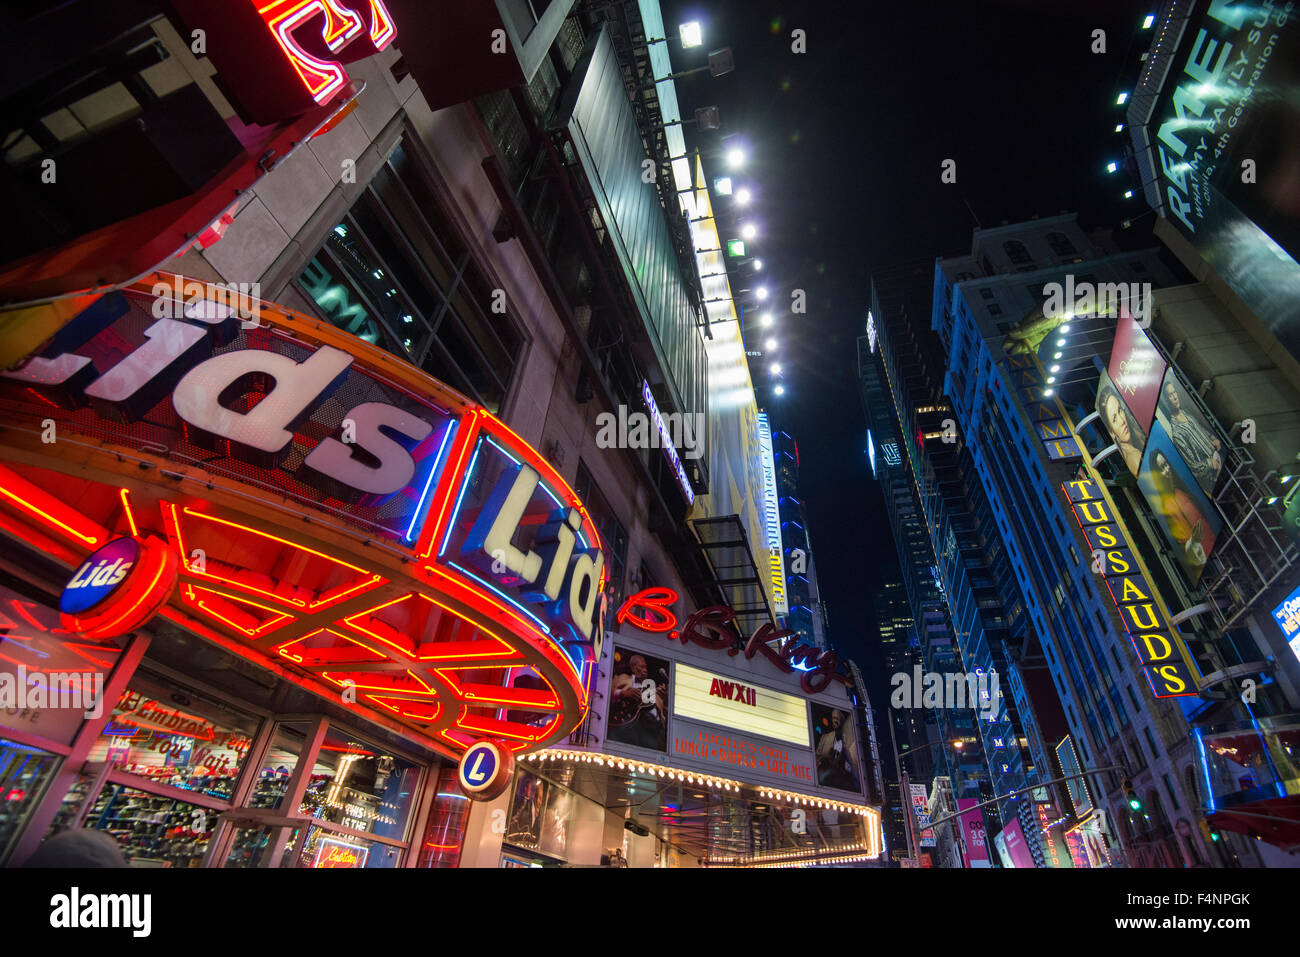 Lids  Times Square NYC